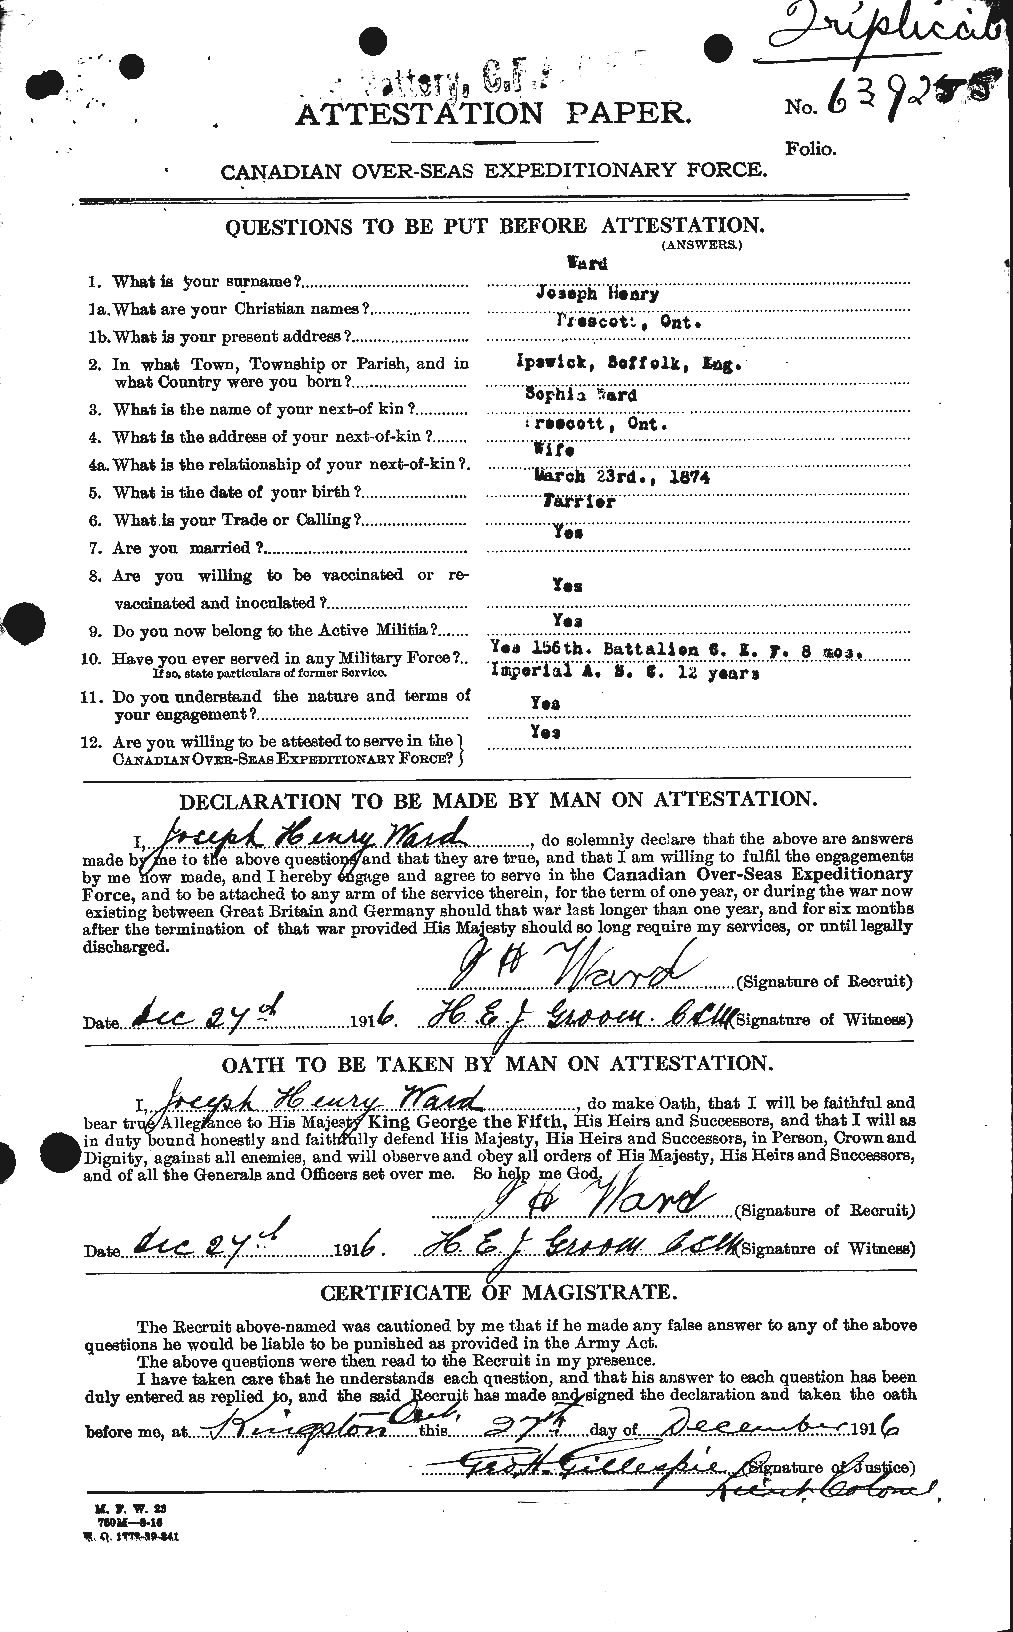 Personnel Records of the First World War - CEF 659566a